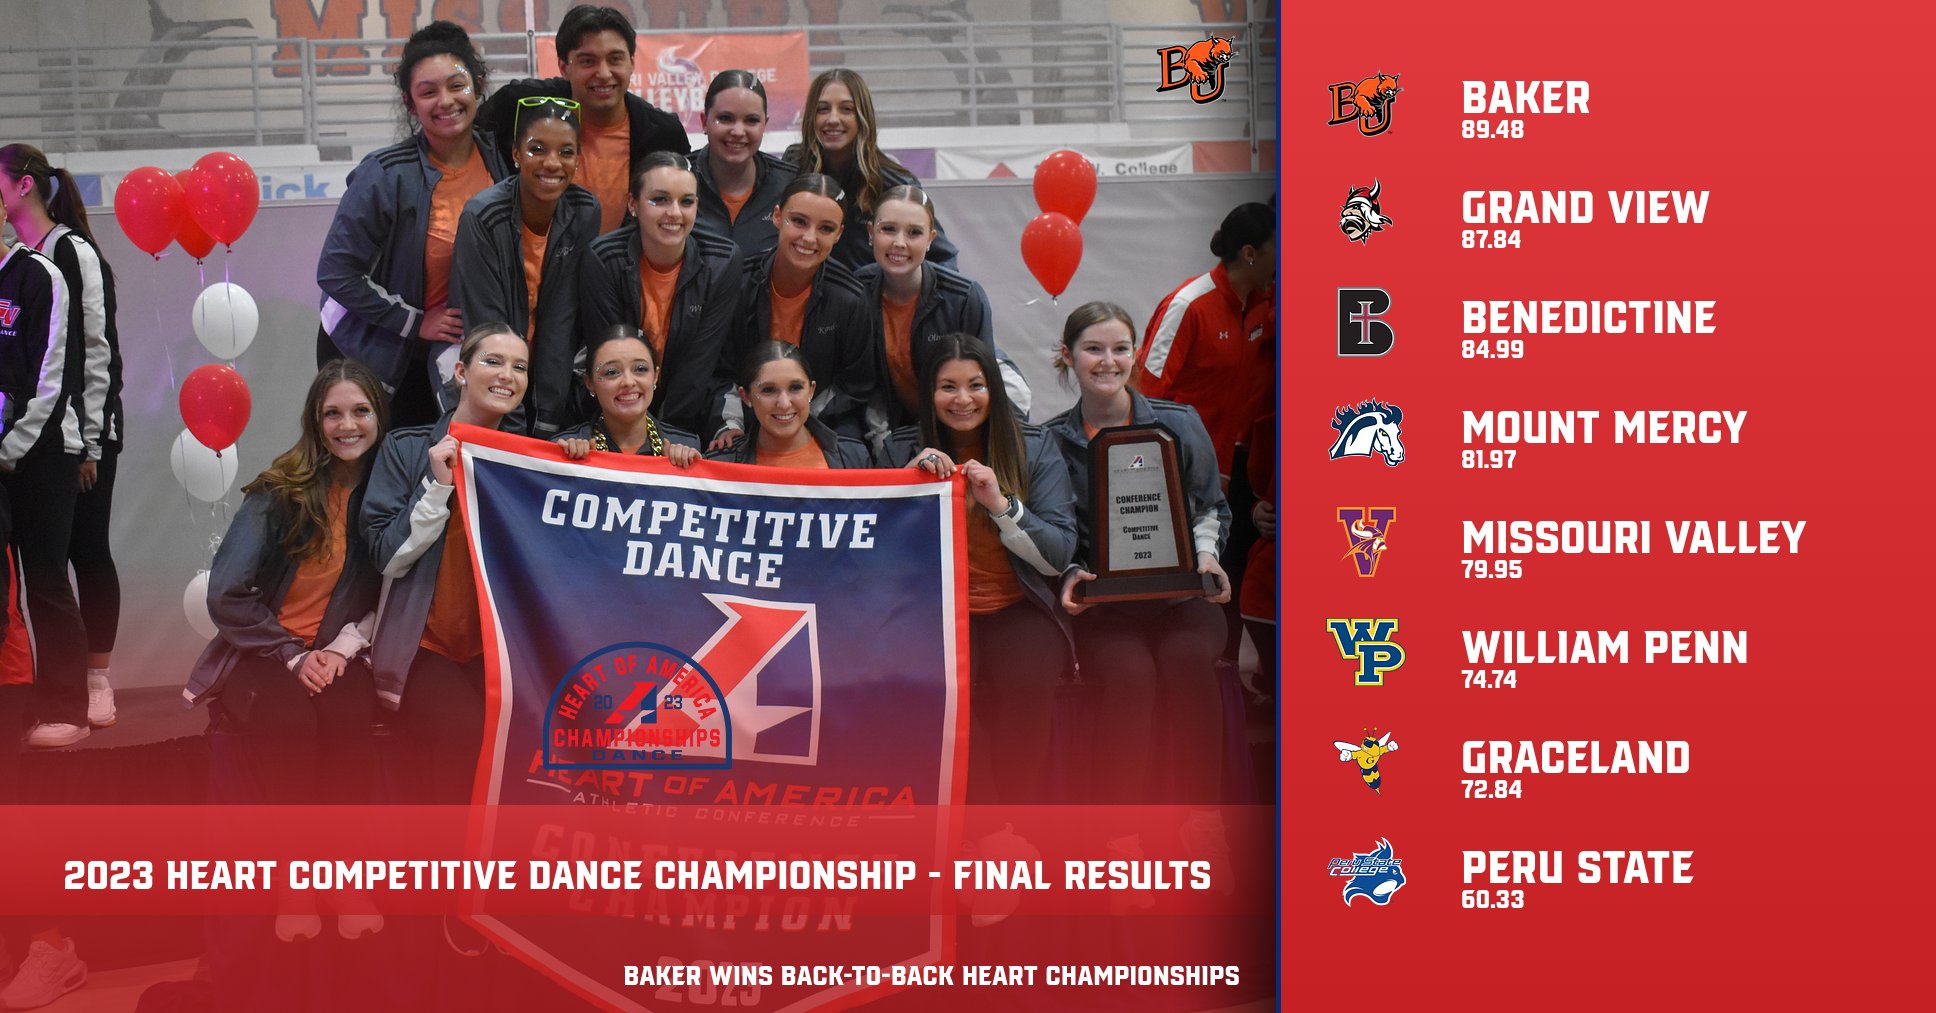 Baker Wins Back-to-Back Heart Competitive Dance Championships